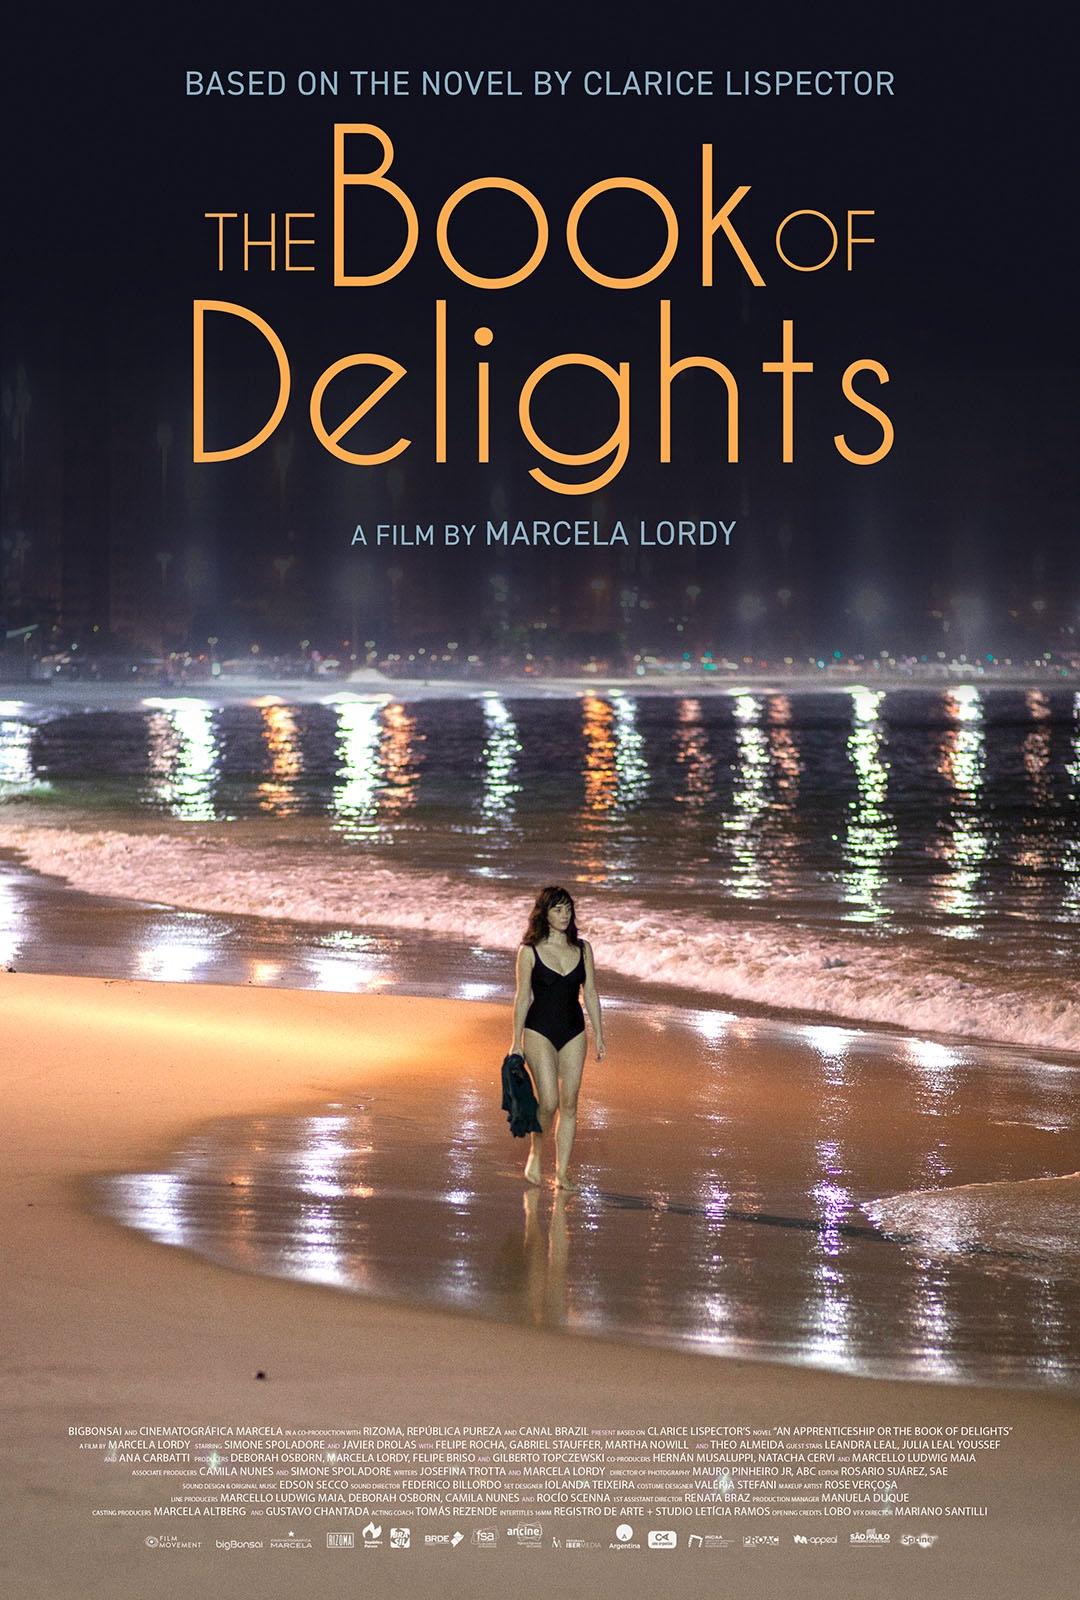 THE BOOK OF DELIGHTS, a Contemporary Erotic Drama Adapted from the Works of Celebrated Brazilian Novelist Clarice Lispector, Premieres Via VOD & Digital on September 2